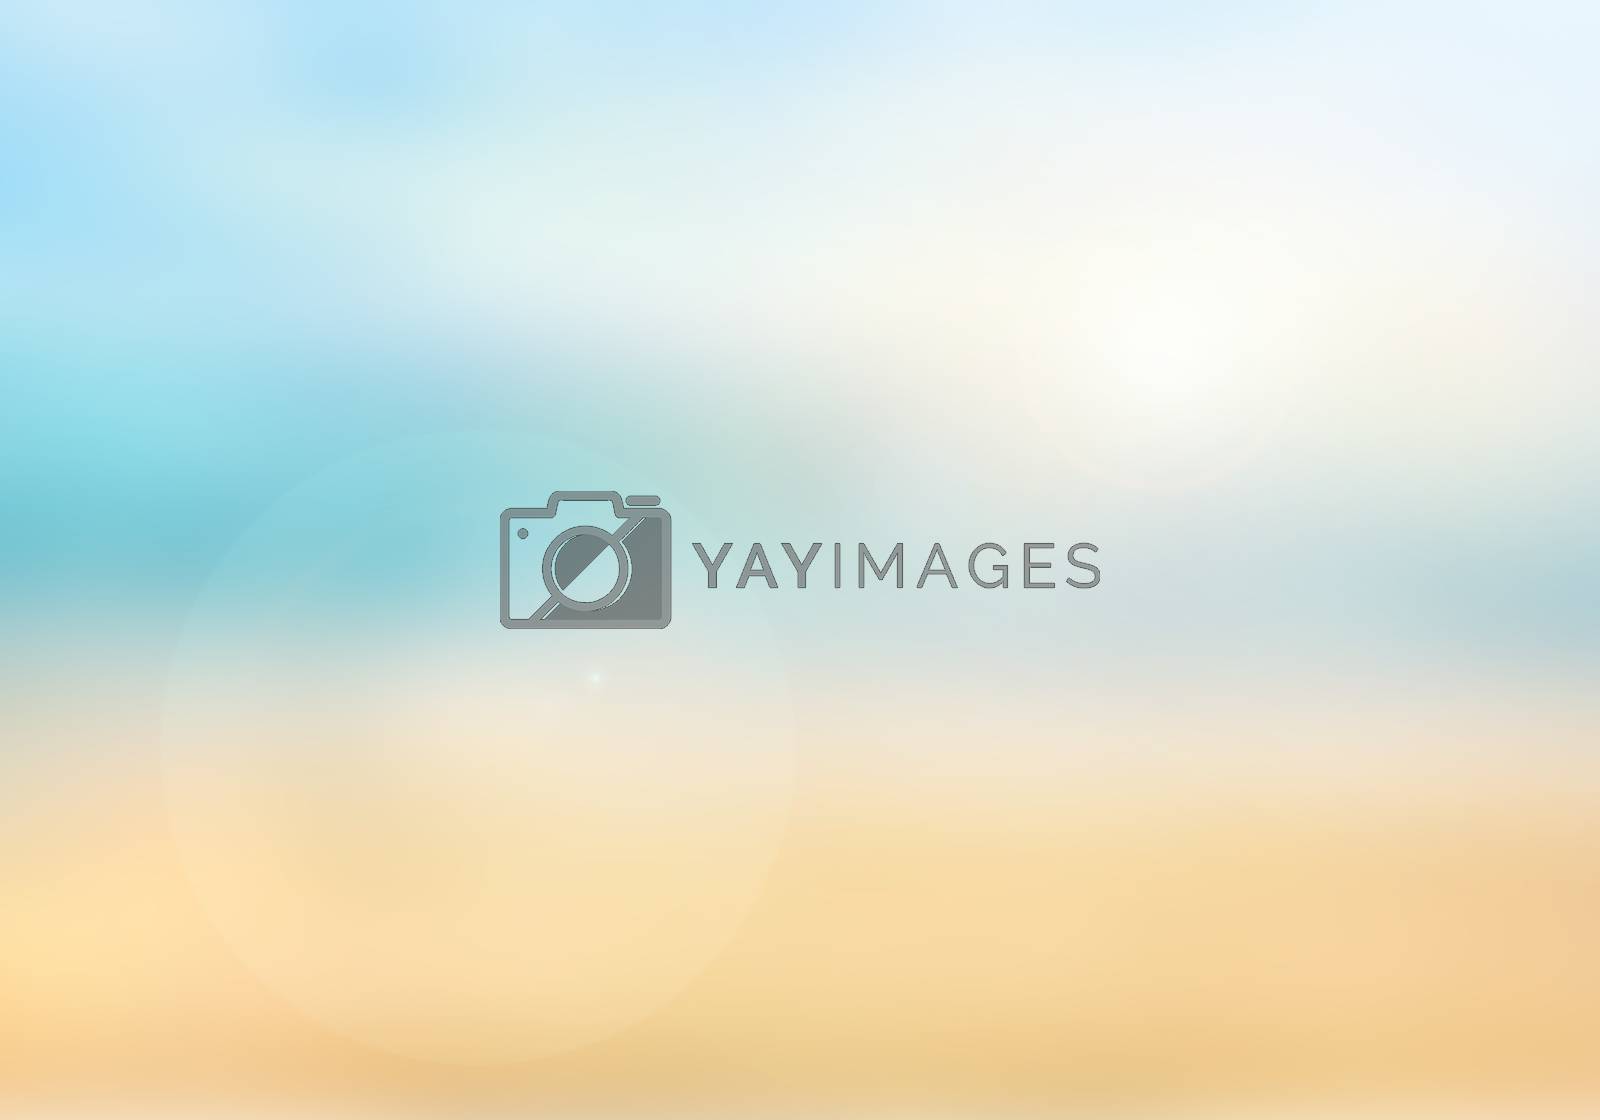 Royalty free image of Blurred nature background by utah778